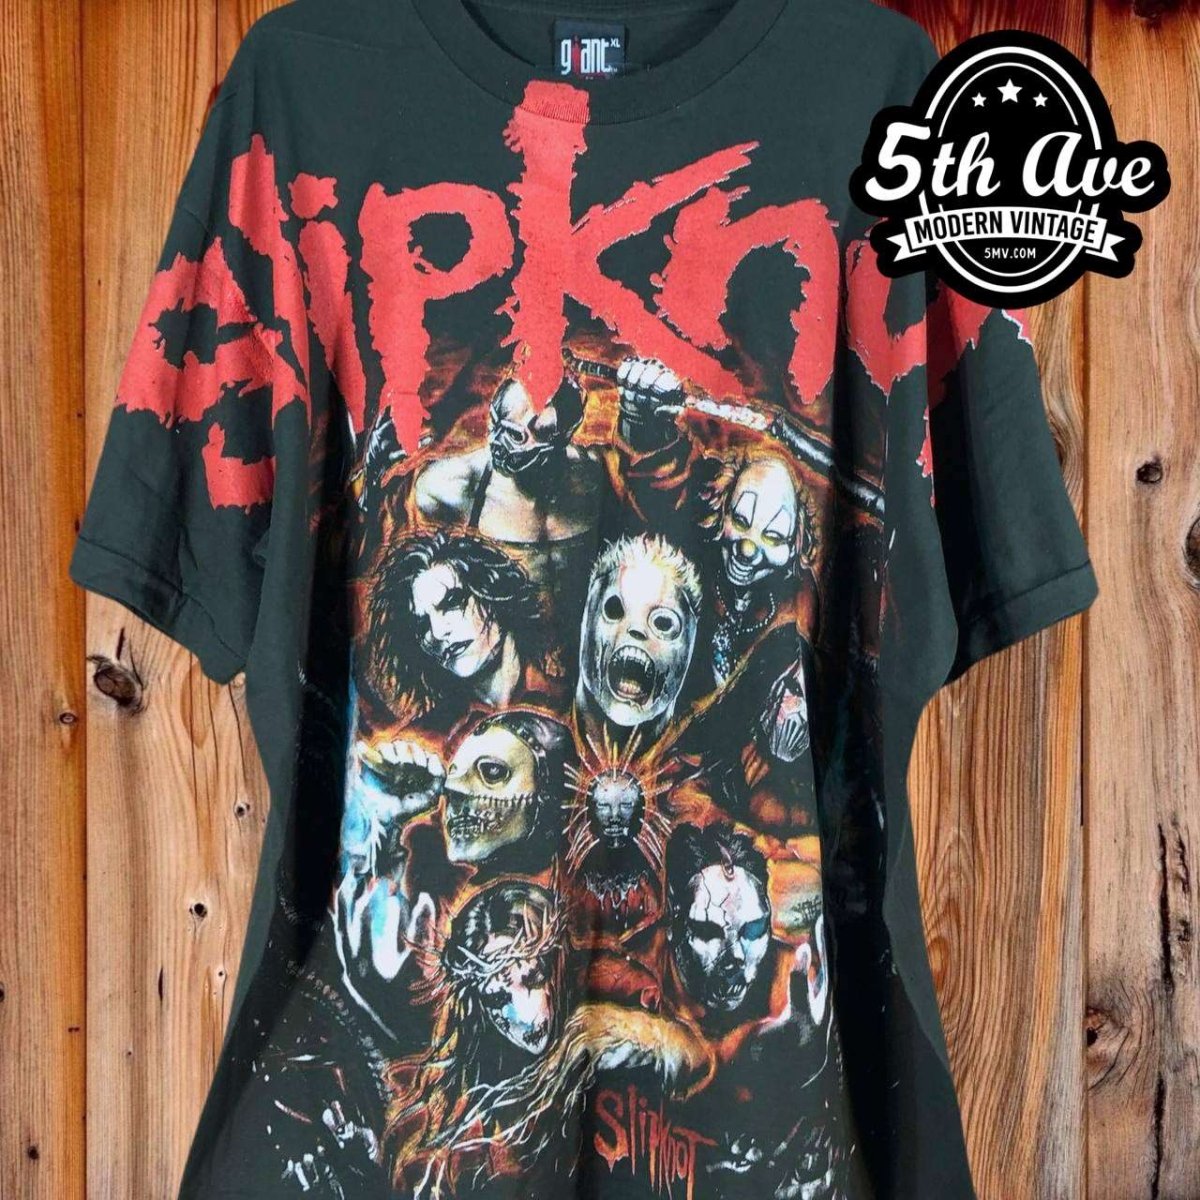 Slipknot: All-Over Print Single Stitch Short Sleeve t shirt with Giant Tag - Vintage Band Shirts